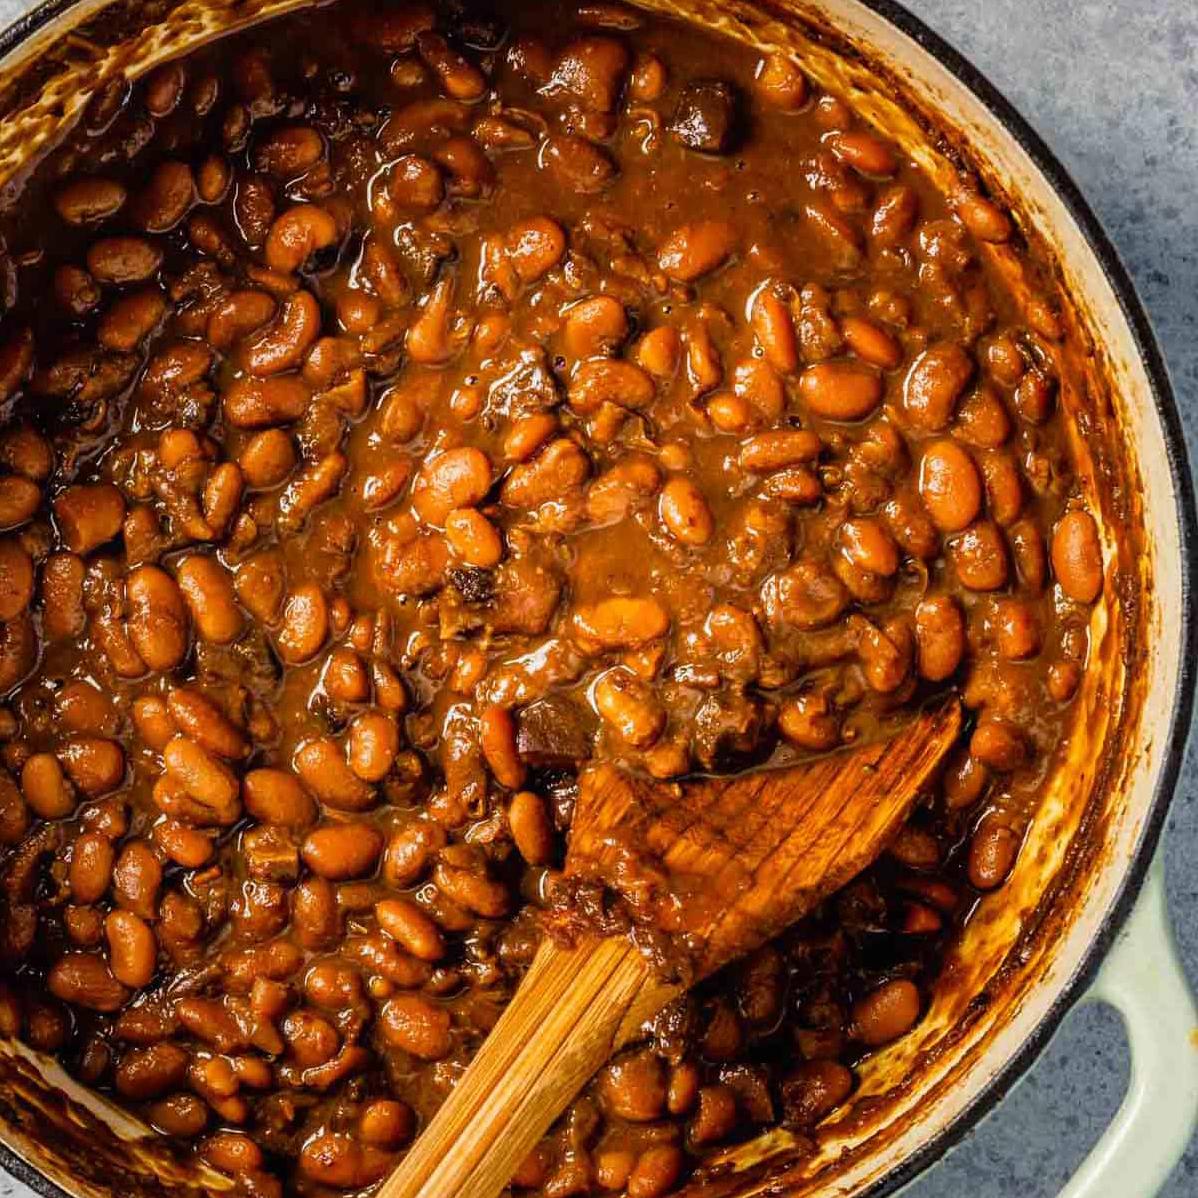 Classic Boston baked beans recipe for the soul